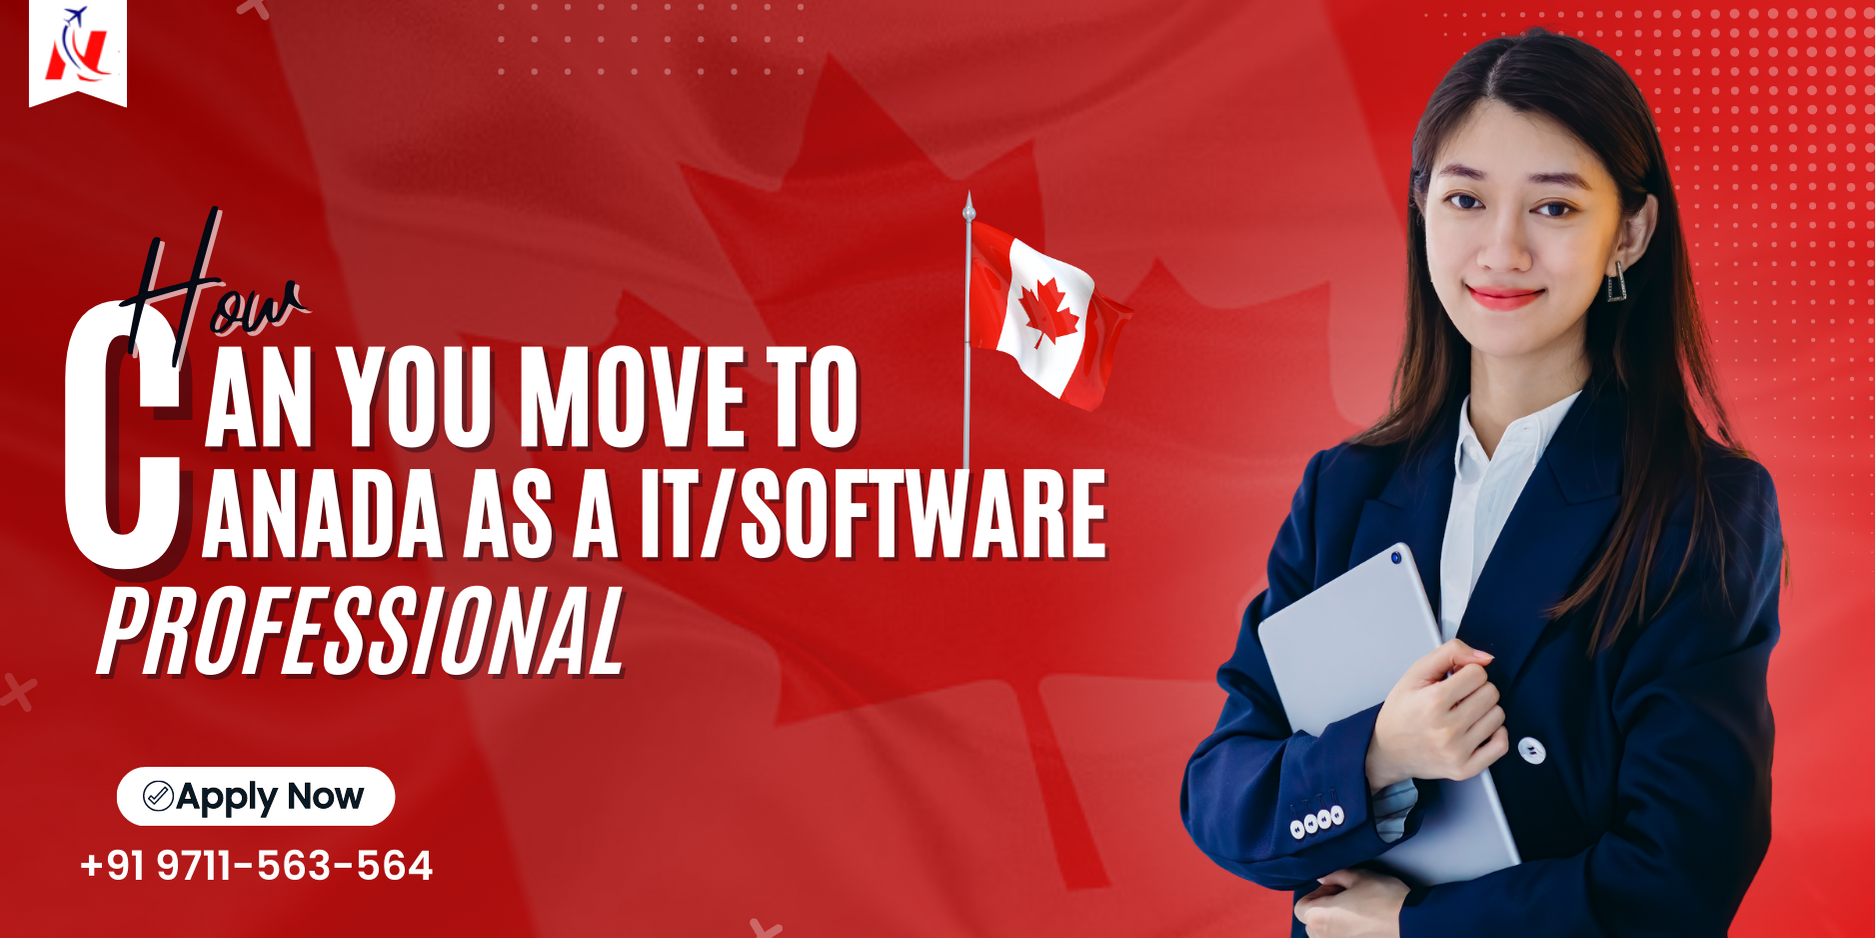 How can you move to Canada as an IT/Software Professional?